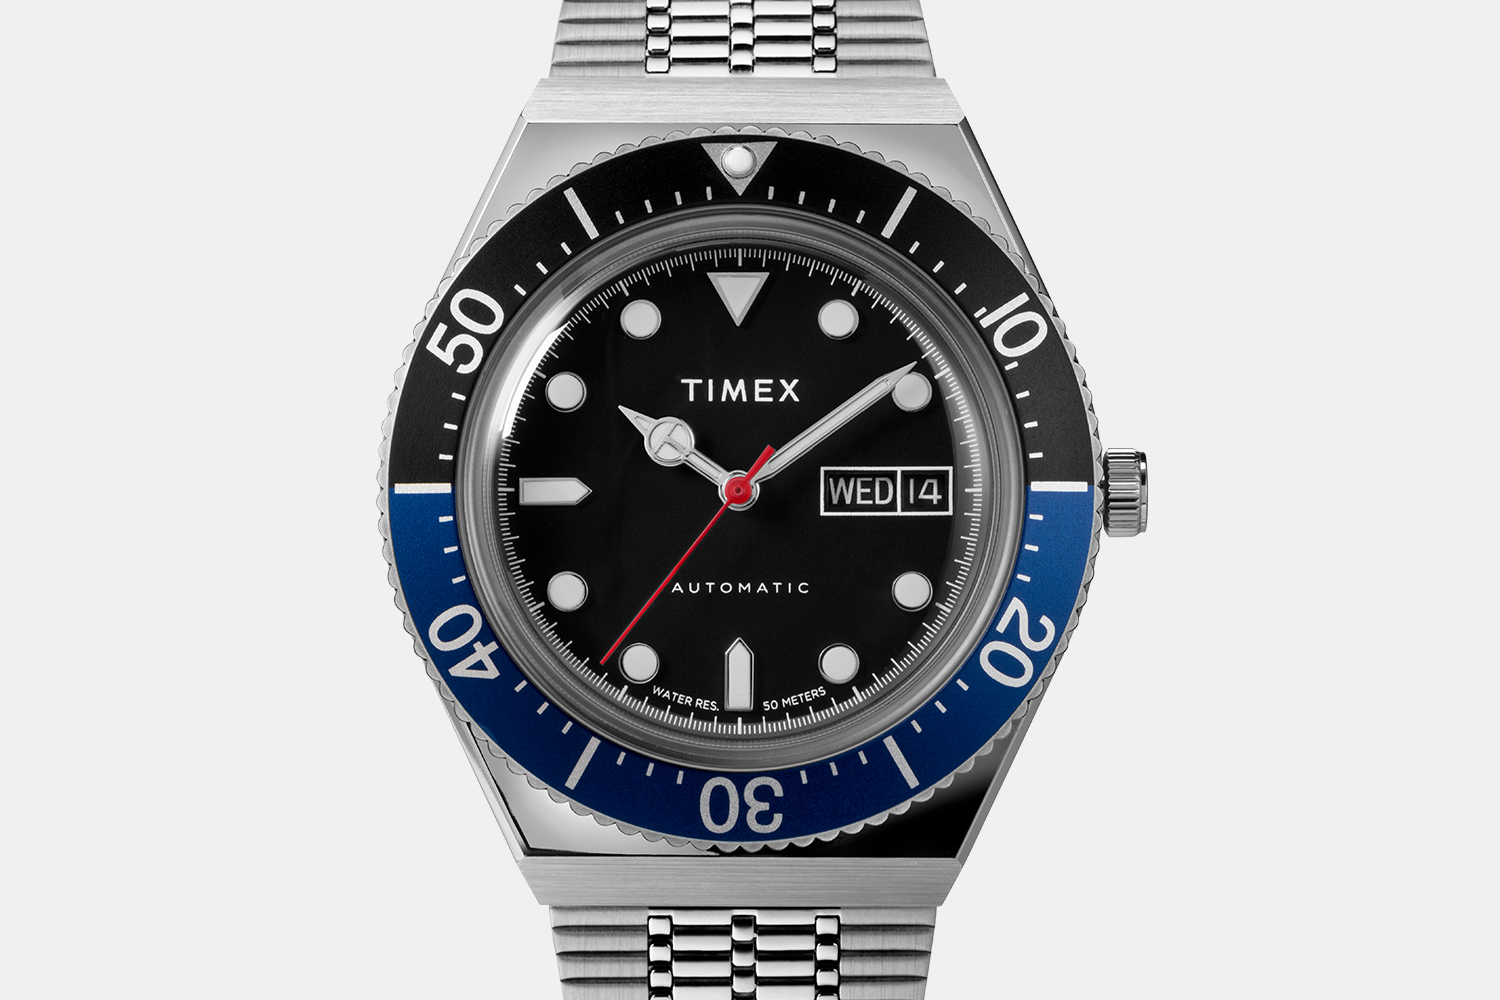 Timex M79 Automatic Emulates Rolex With 